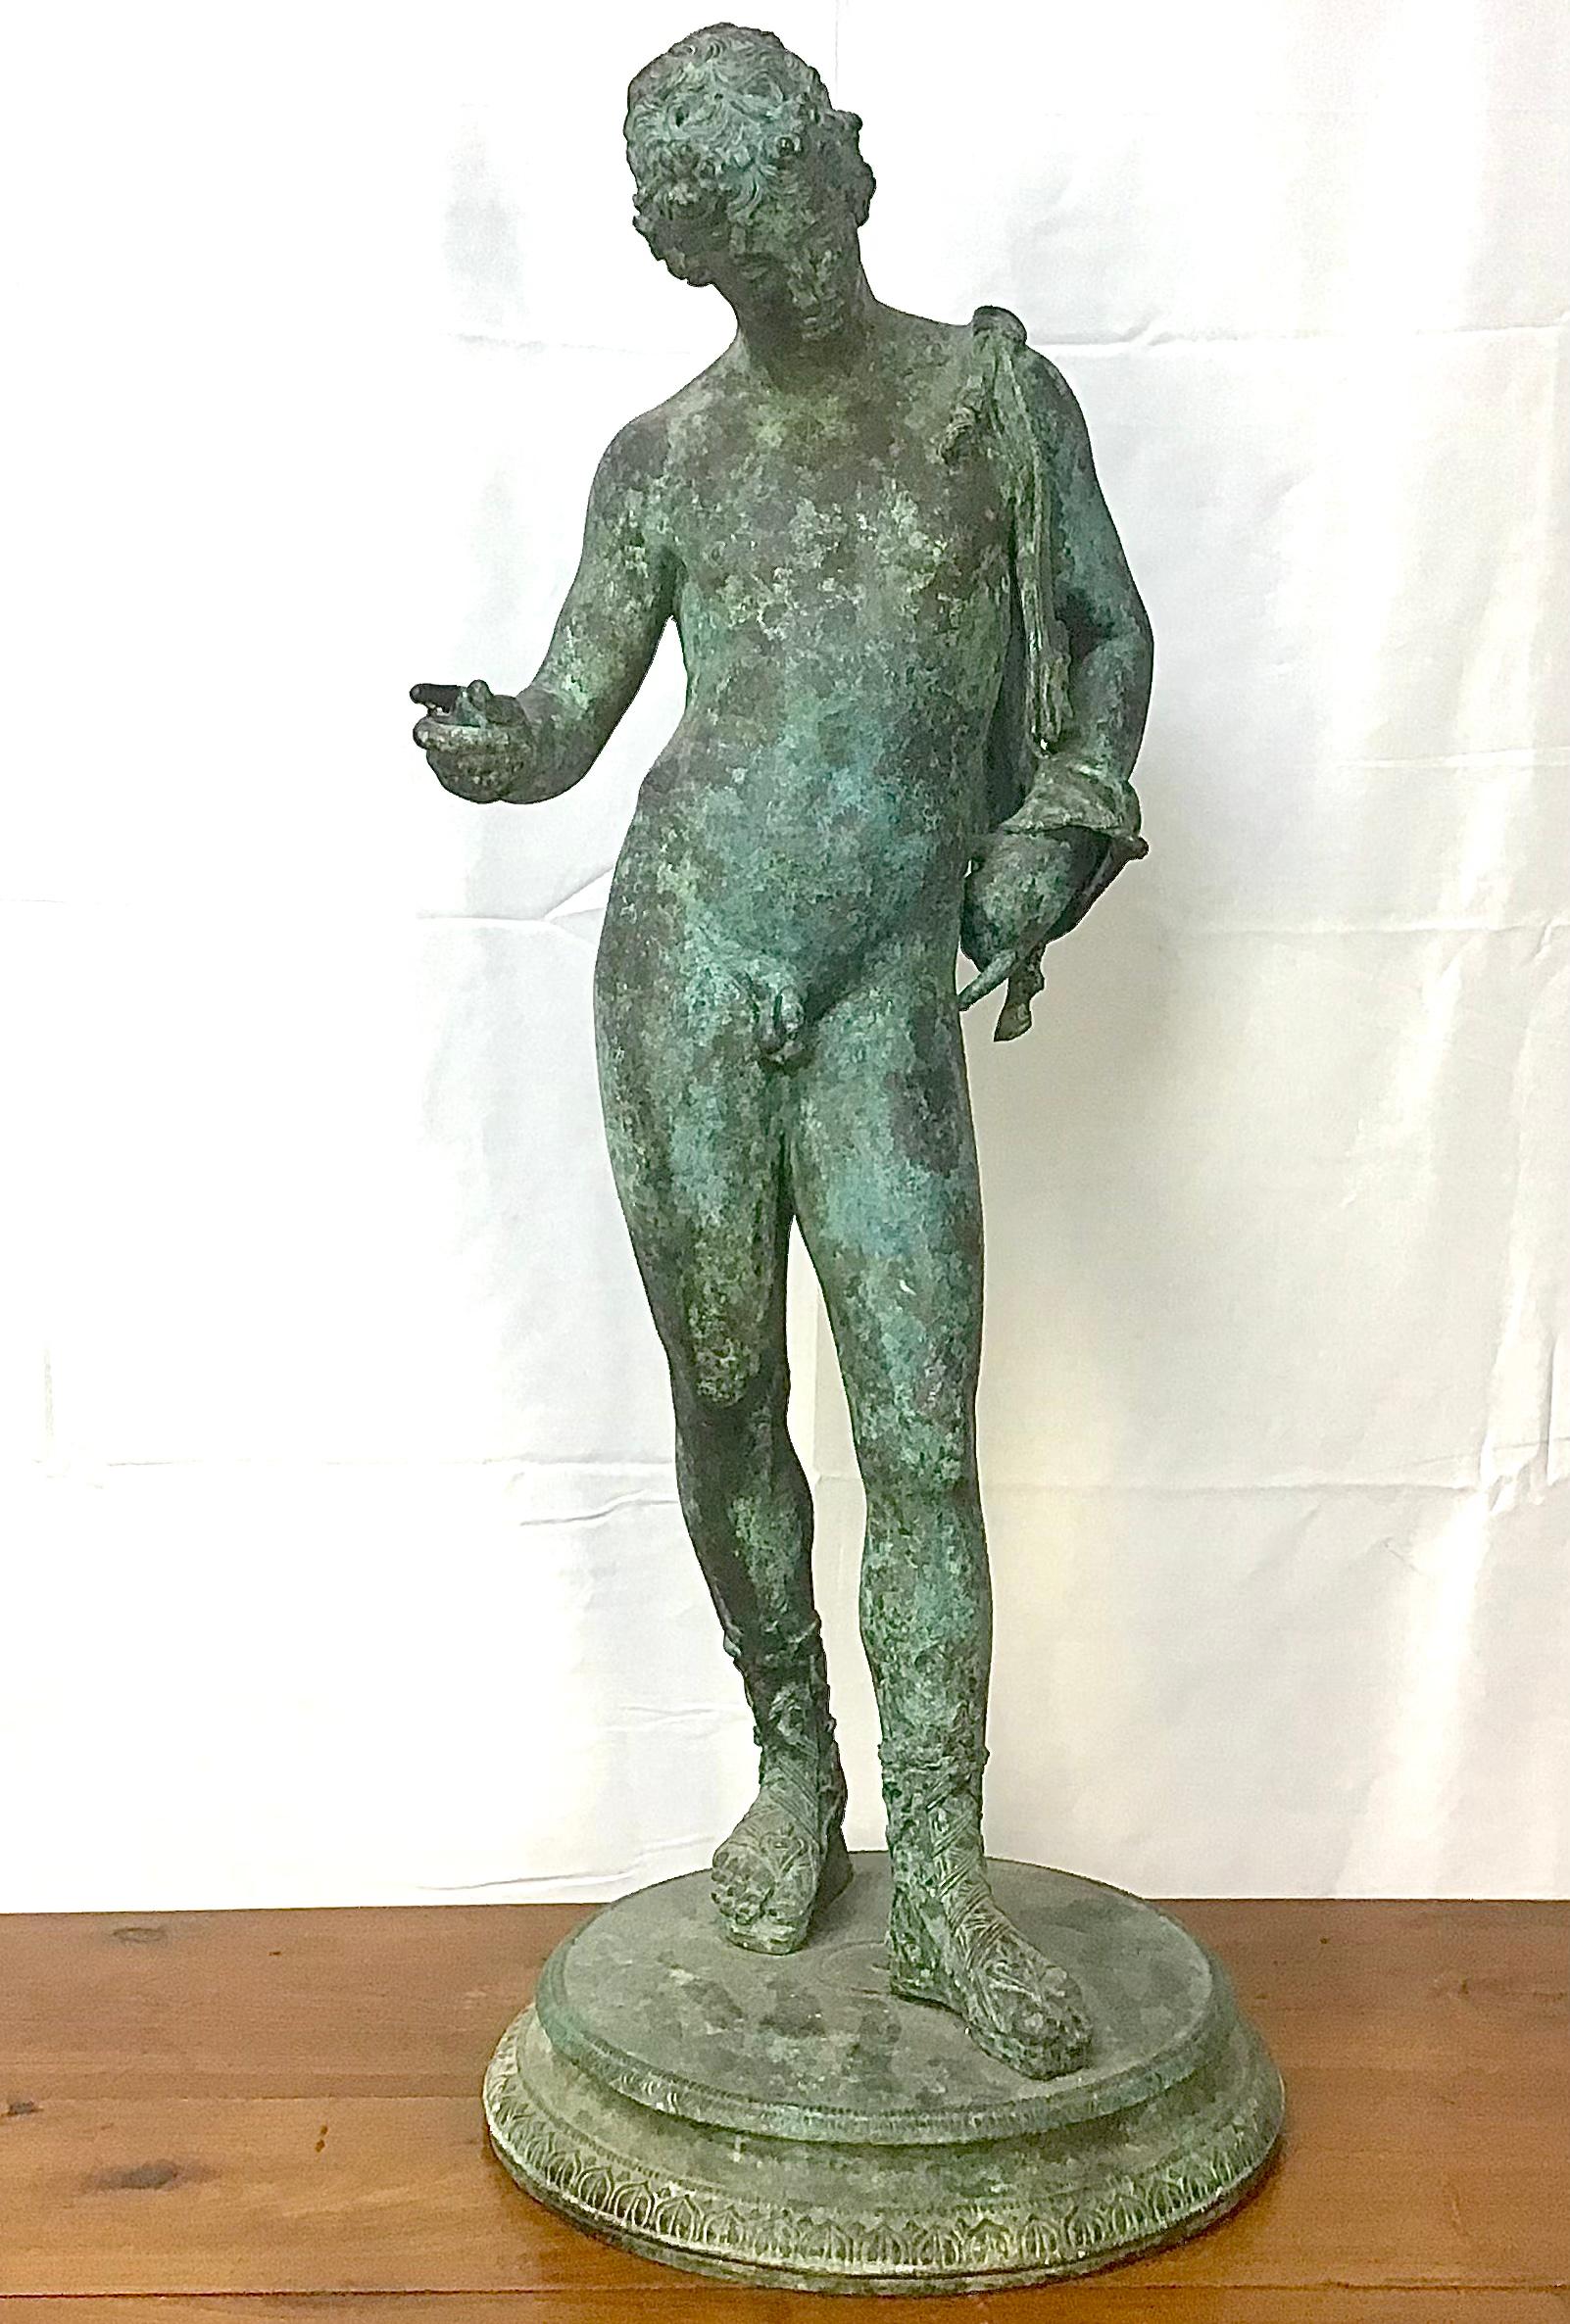 Italian Classical Grand Tour bronze sculpture of Narcissus with a verdigris patina, believed to by Chiurazzi, or a similar foundry, Naples, circa 1900.

Narcissus is shown nude except for a pair of sandals, standing on a circular plinth with his